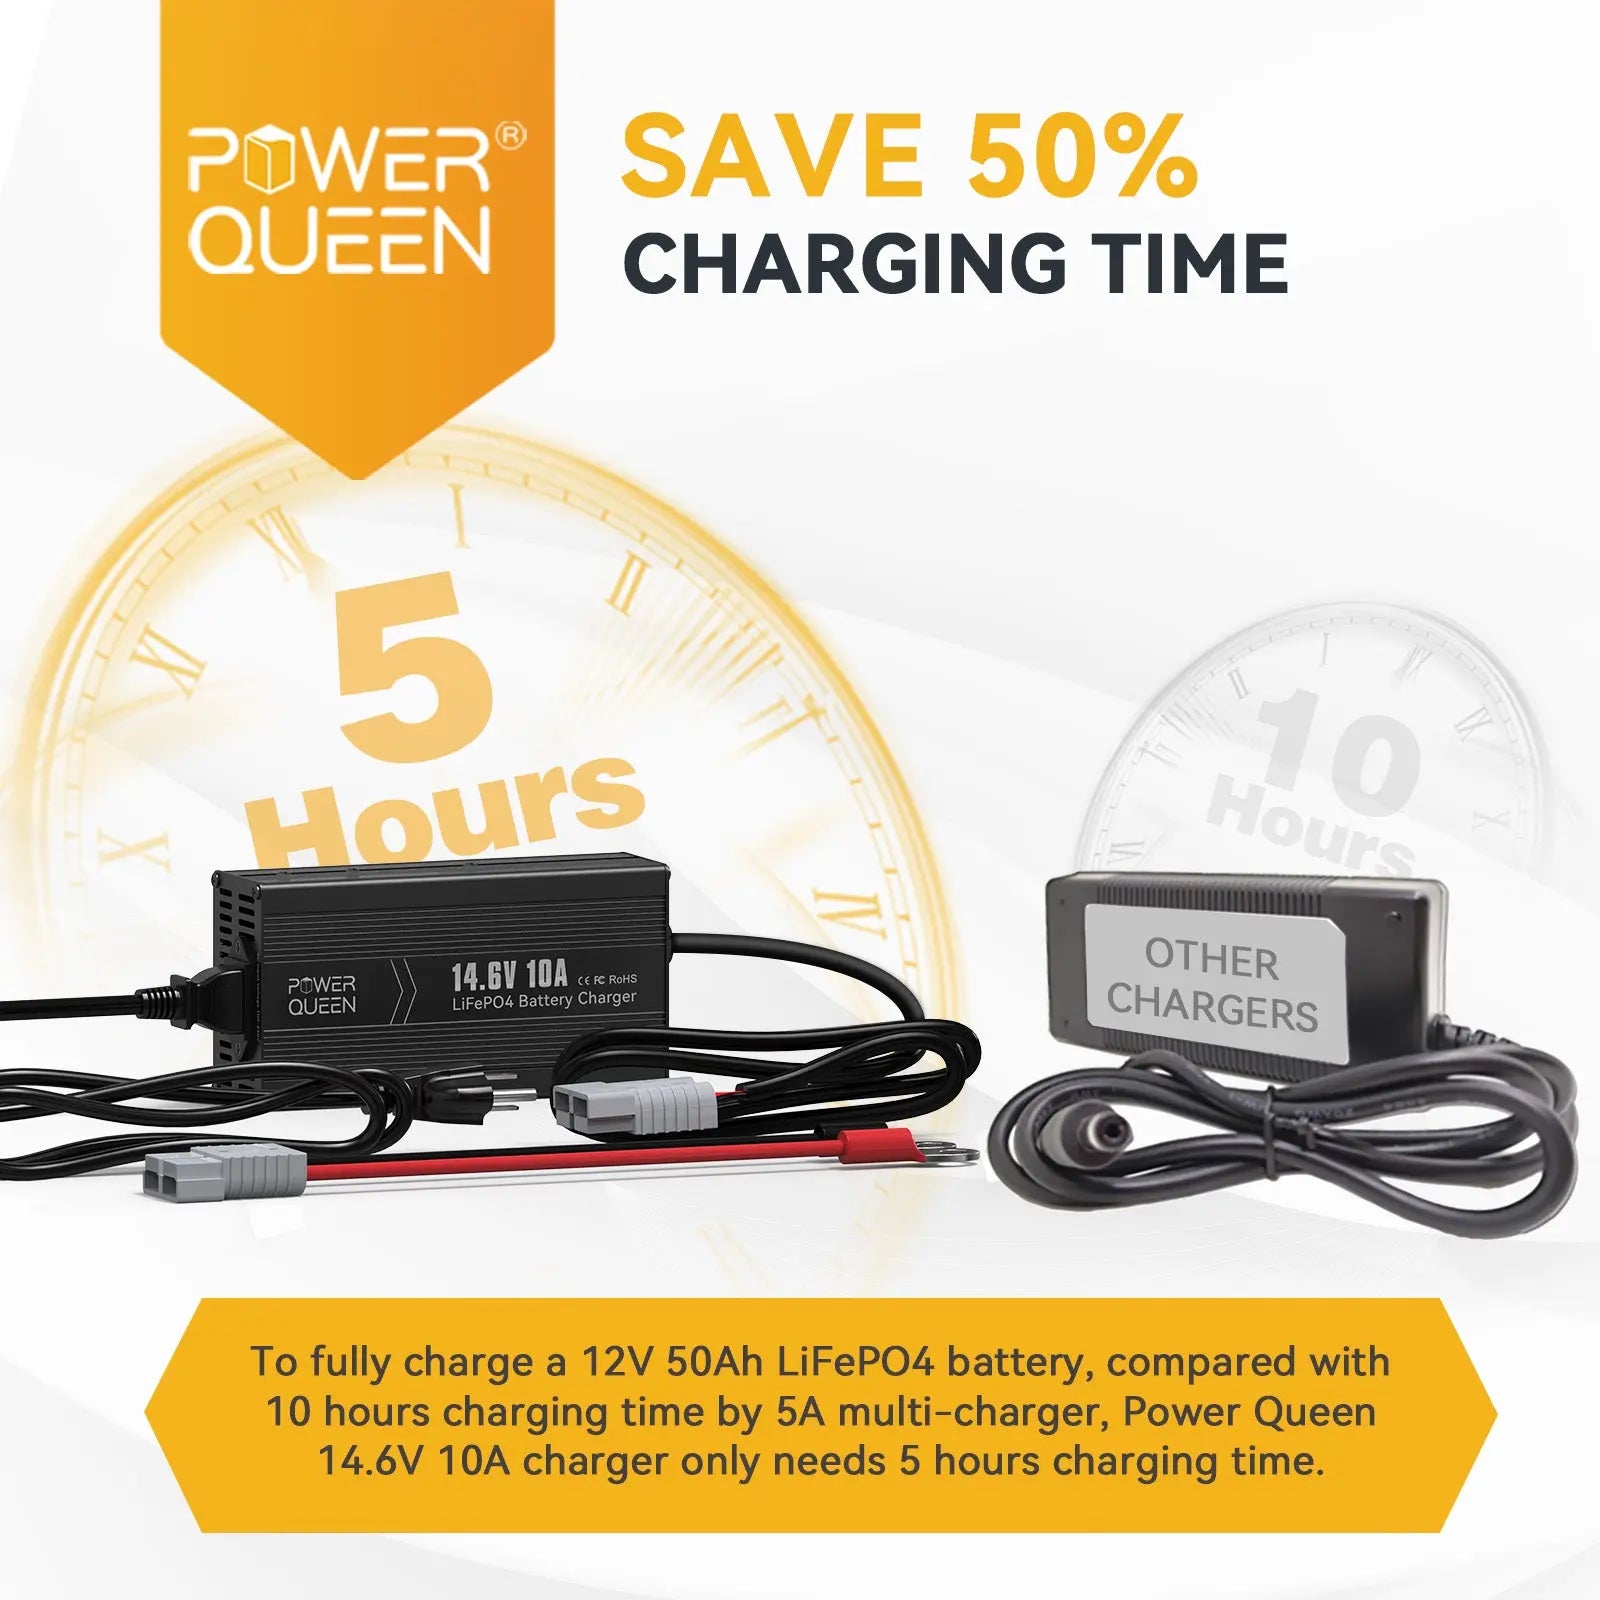 Power Queen 14.6V 10A LiFePO4 Battery Charger